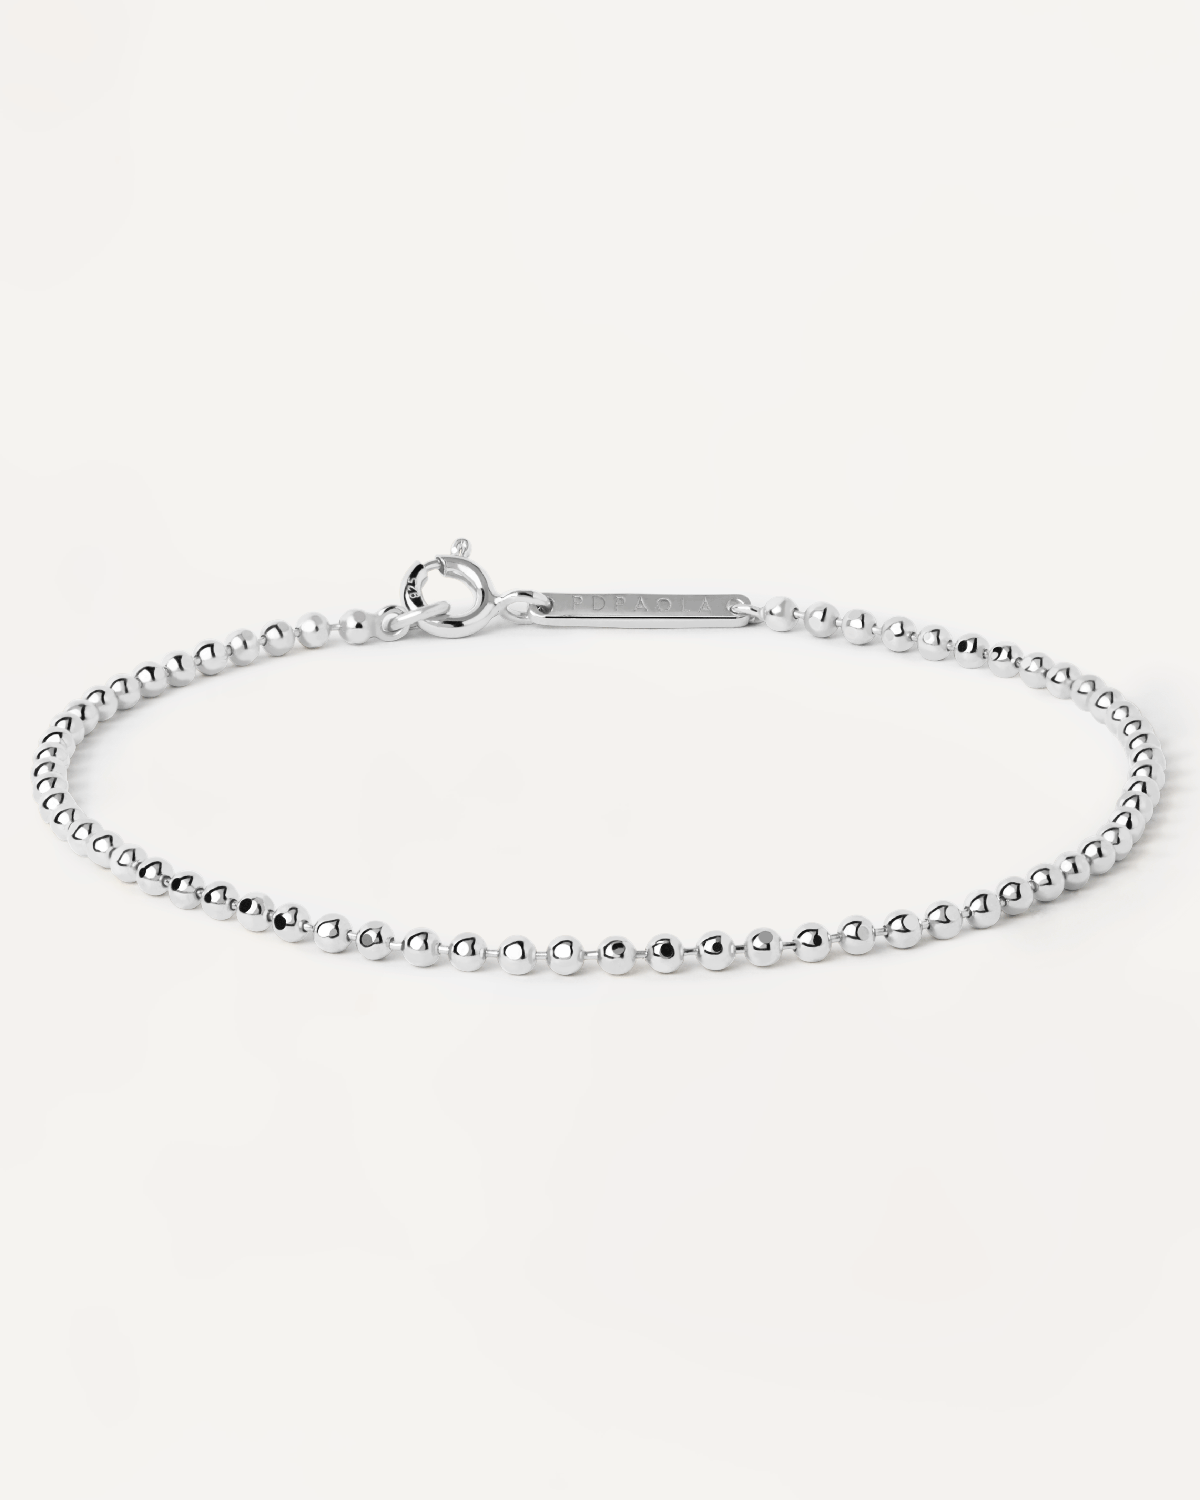 2023 Selection | Ball Chain Silver Bracelet. Ball-textured chain bracelet in plain sterling silver. Get the latest arrival from PDPAOLA. Place your order safely and get this Best Seller. Free Shipping.